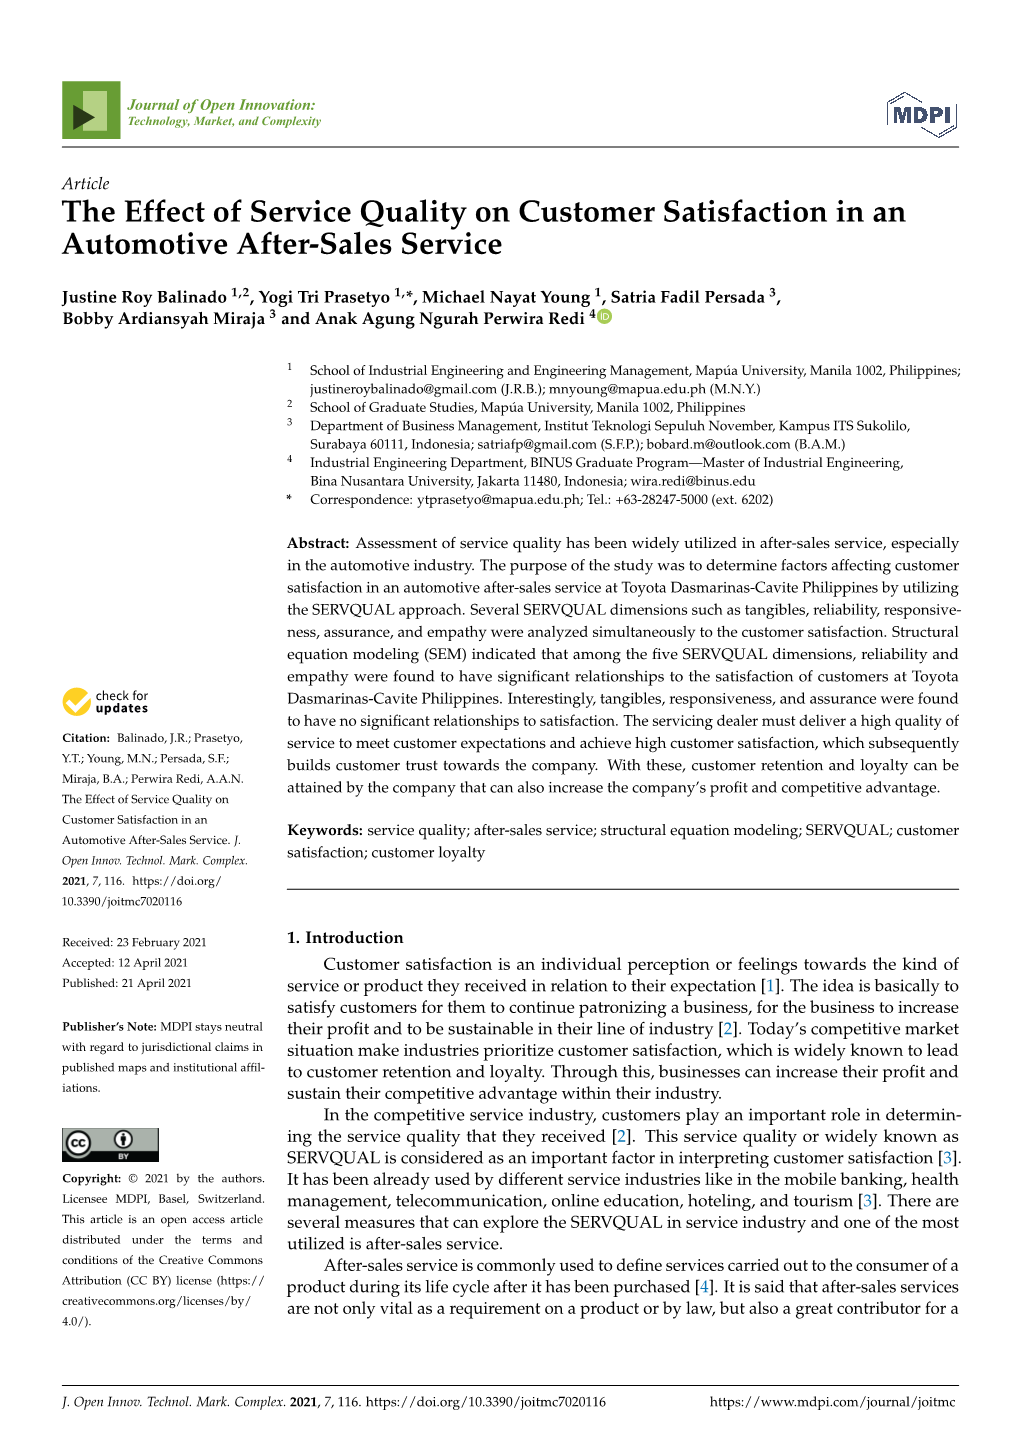 The Effect of Service Quality on Customer Satisfaction in an Automotive After-Sales Service